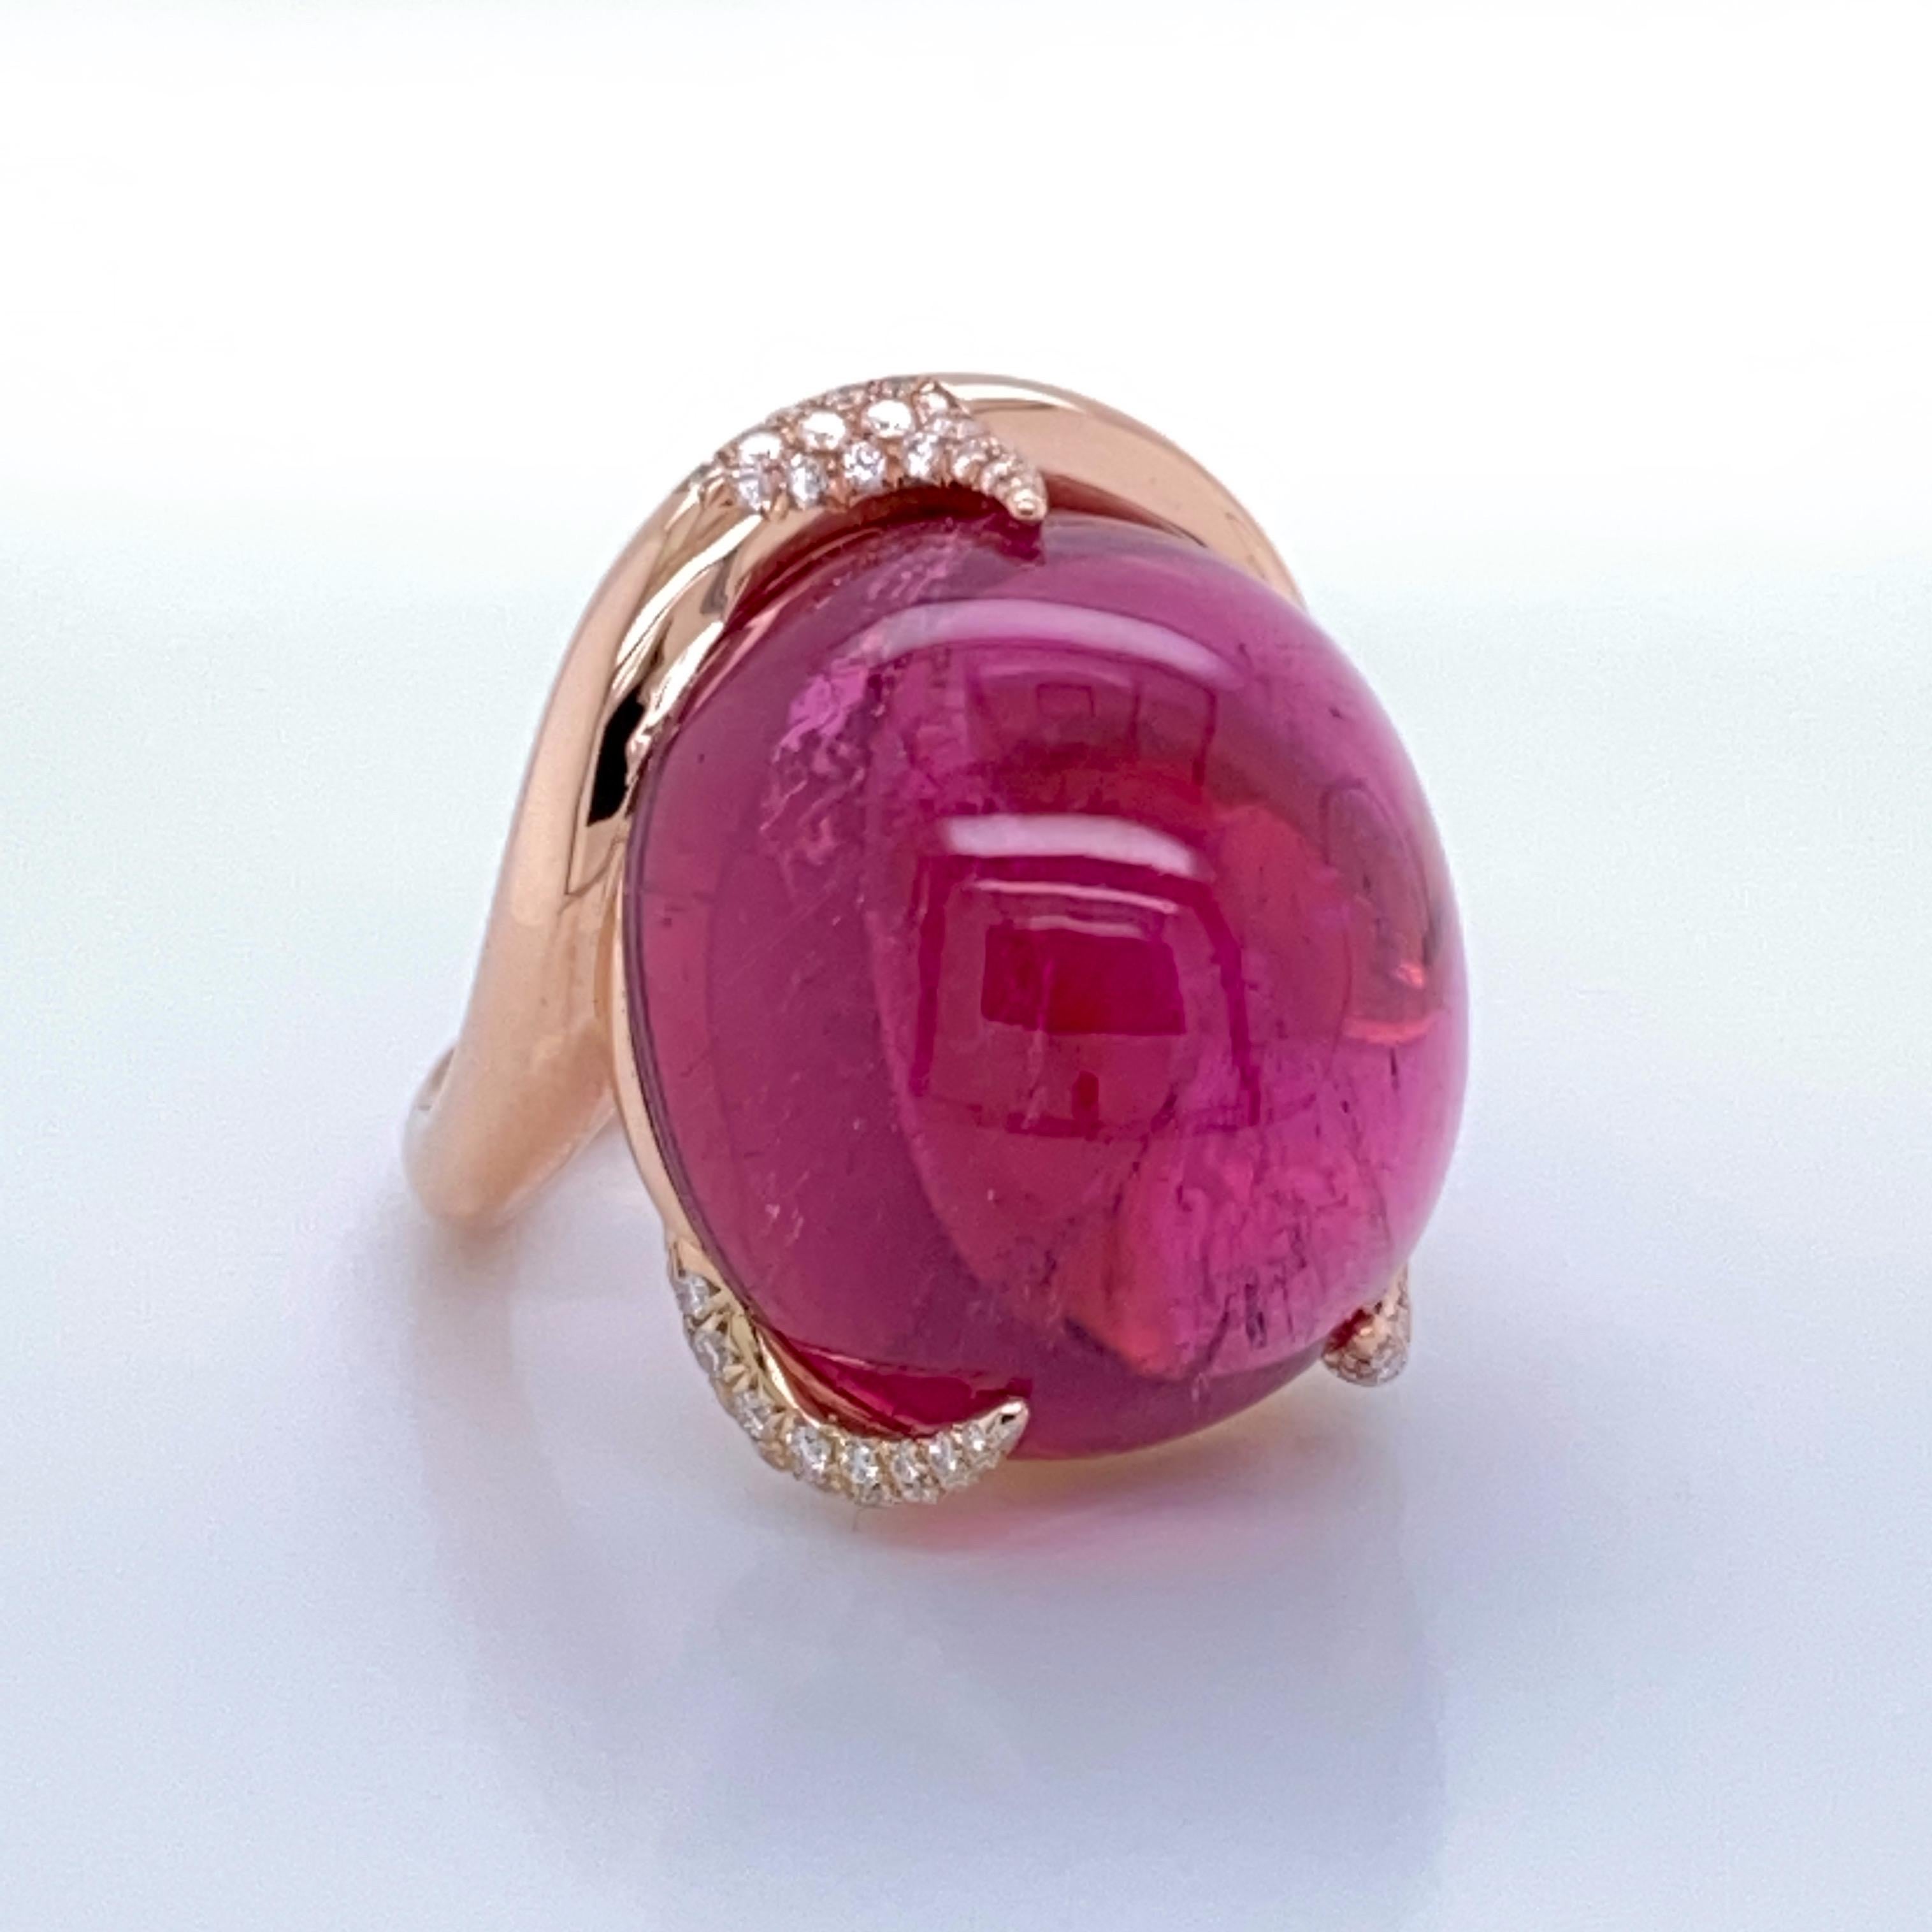 18K Gold Pink Tourmaline cabochon 47.72 Cts Ring

Ring gold 18K  15,78 gr
0,42 Cts Diamonds brilliant cut 
Pink Tourmaline cabochon 47,72 Cts
Size 54

This stunning pink tourmaline ring is a real eye-catcher and is perfect to be worn on any